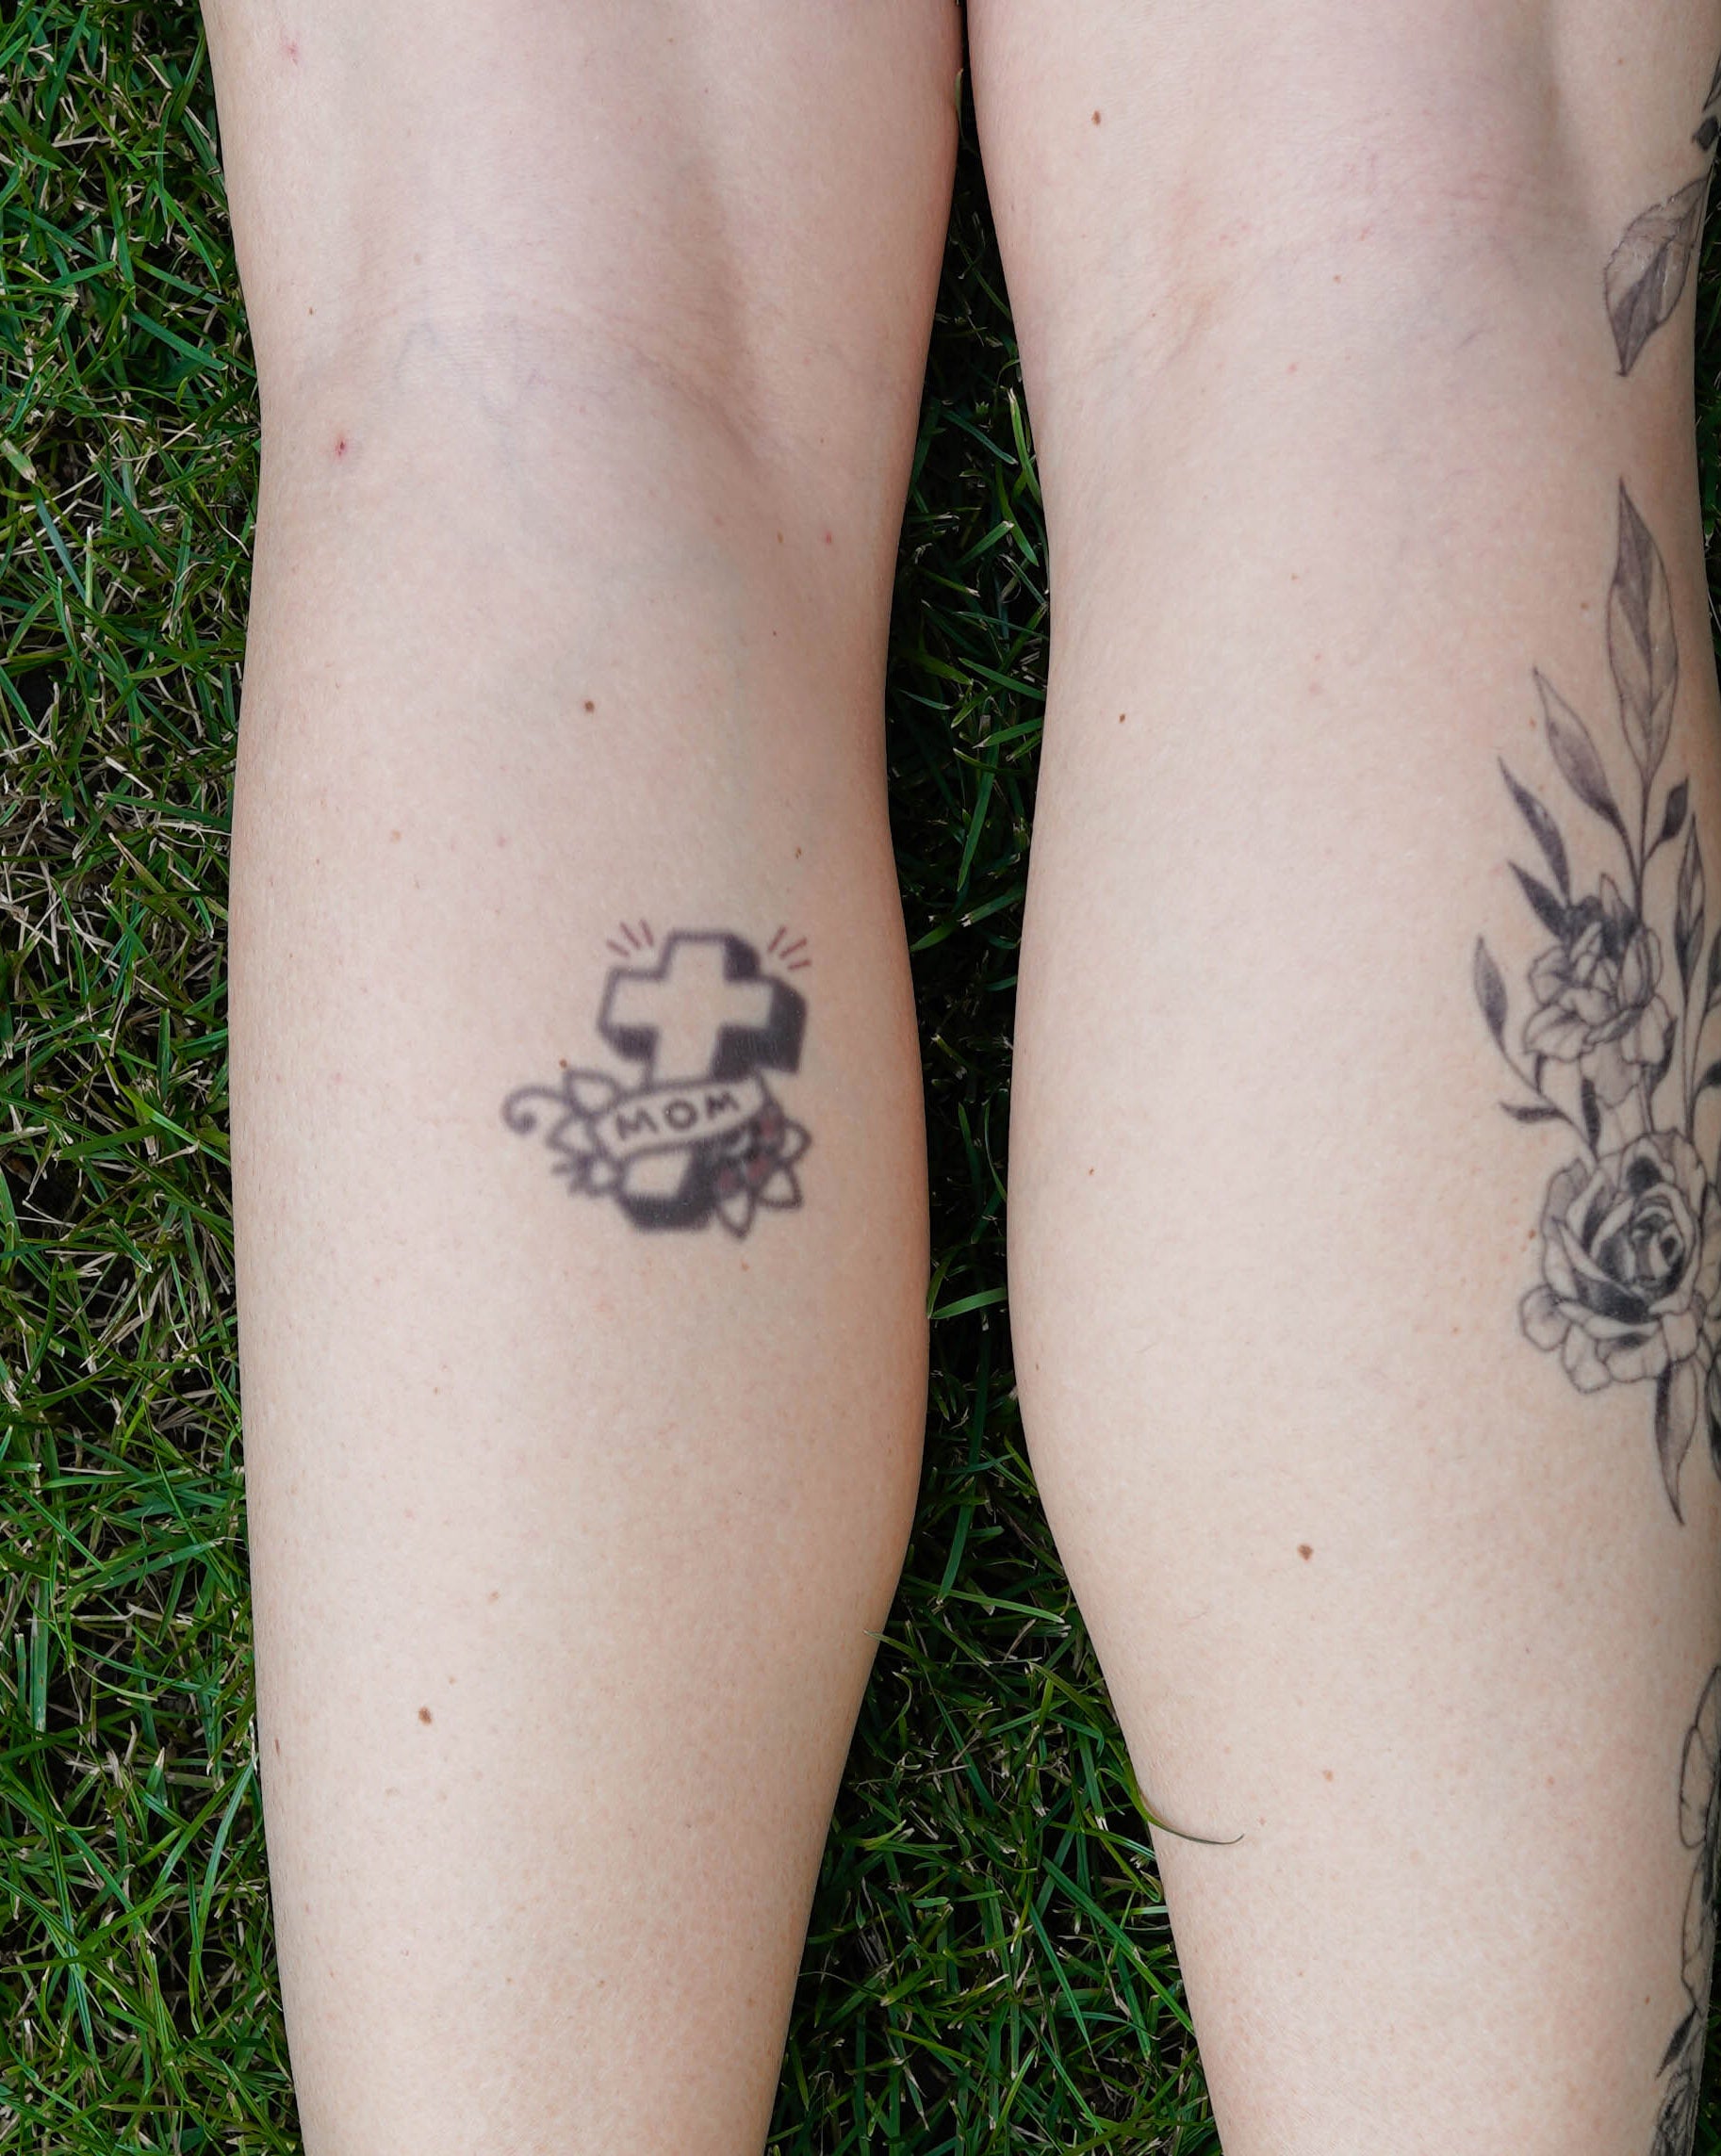 Toronto's top tattoo artists on their favourite mom-inspired tattoos